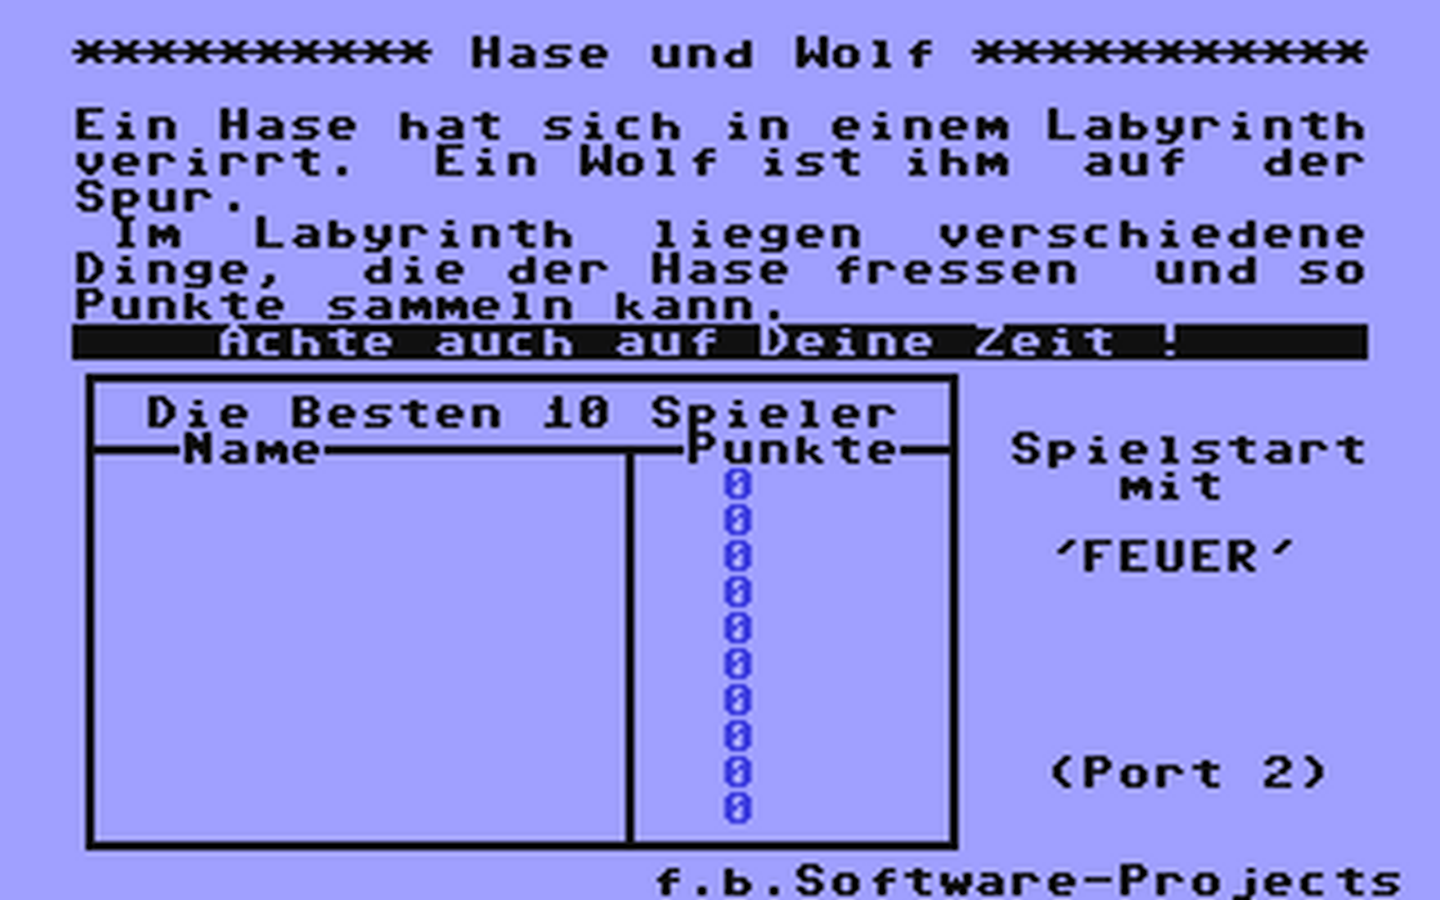 C64 GameBase Hase_und_Wolf FB_Software-Projects